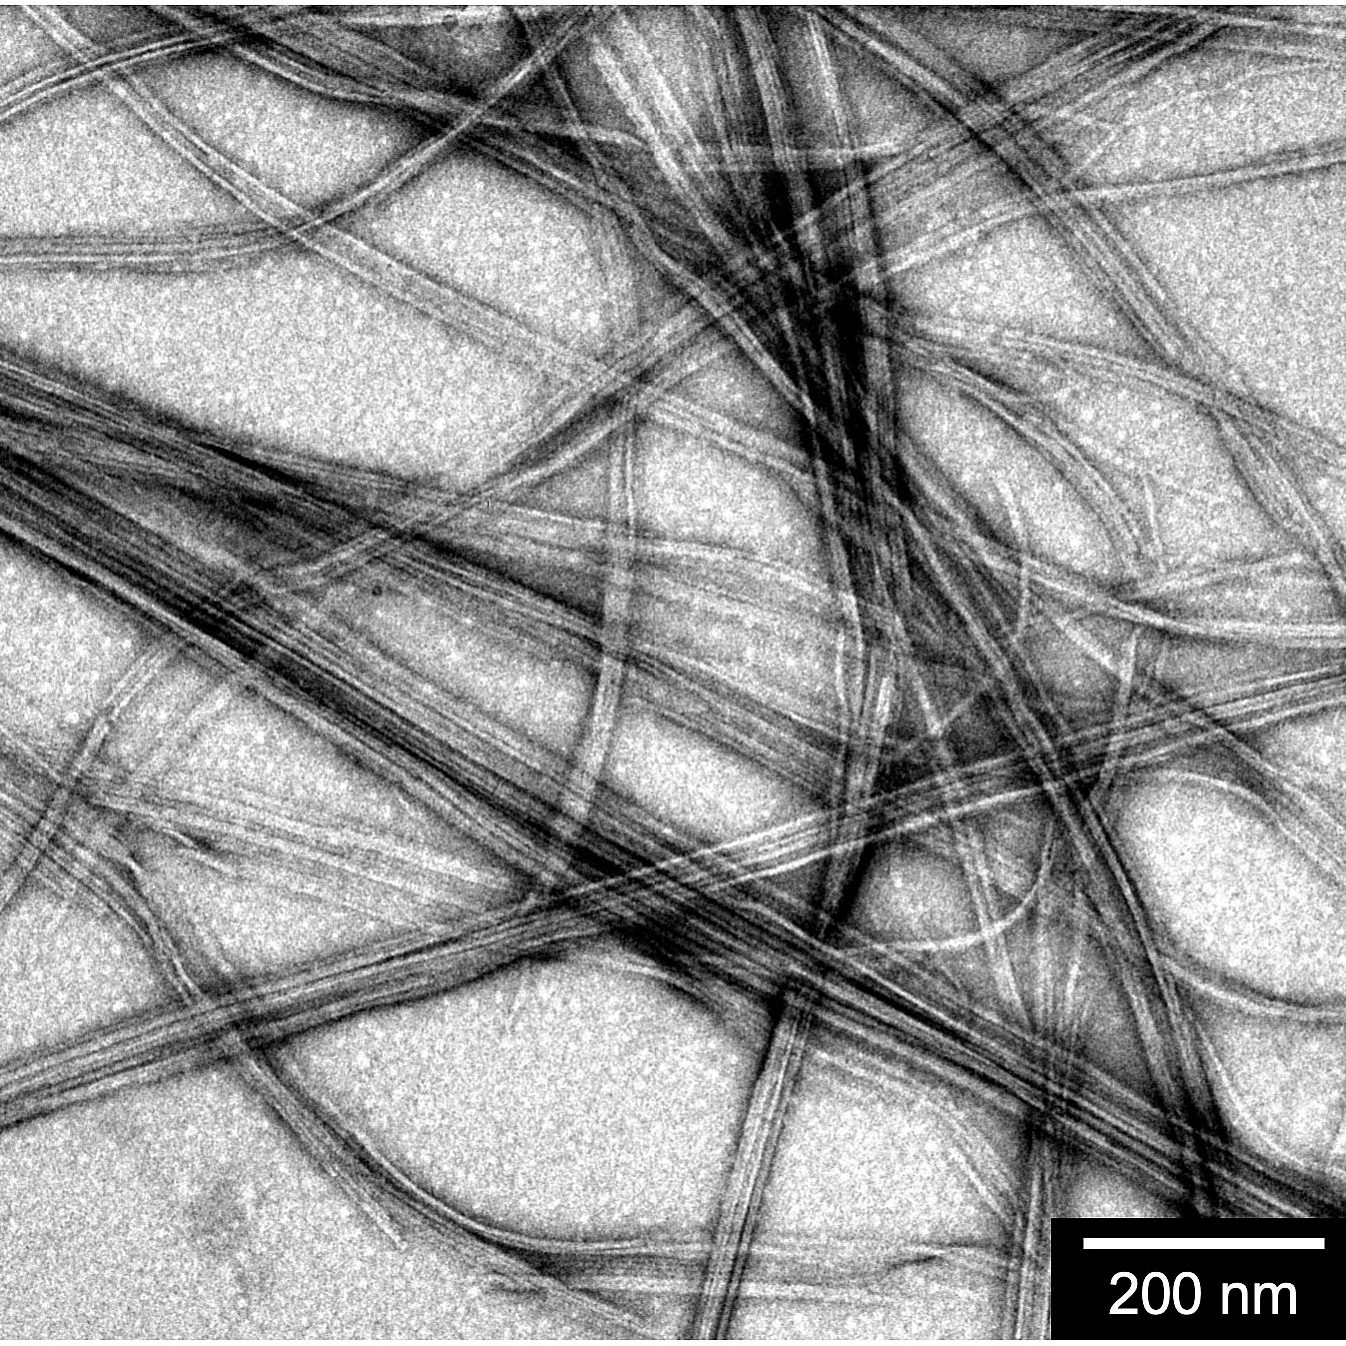 These are the first nanofibers that formed when Ty Christoff-Tempesta hit on a molecule design that self-assembles into a stable nanomaterial with high surface area